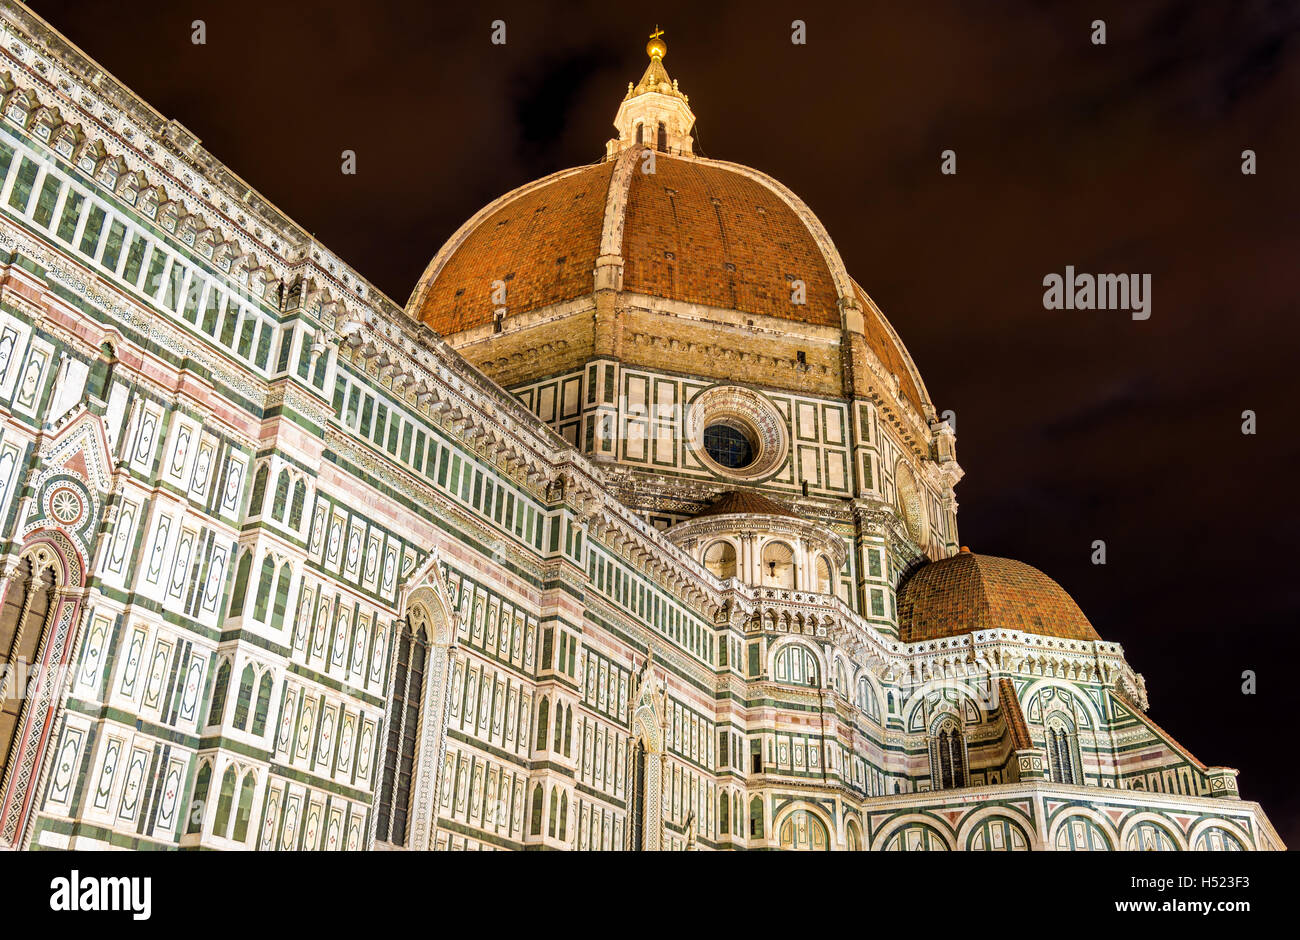 The Dome of the Florence Cathedral - Italy Stock Photo